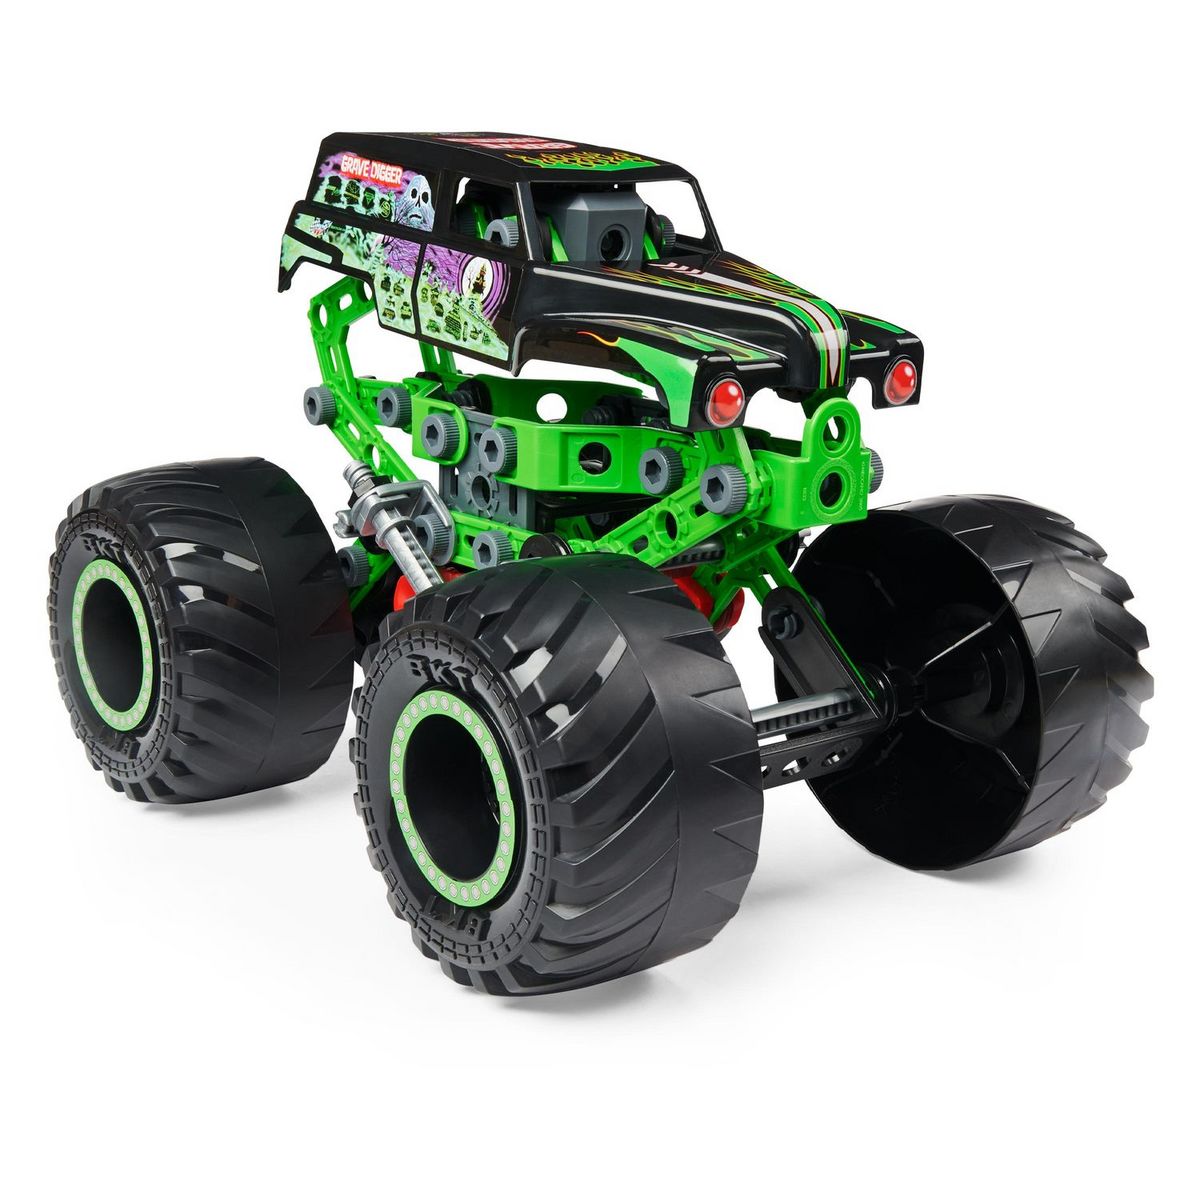 SPIN MASTER Véhicule Monster Truck Grave Digger Meccano junior